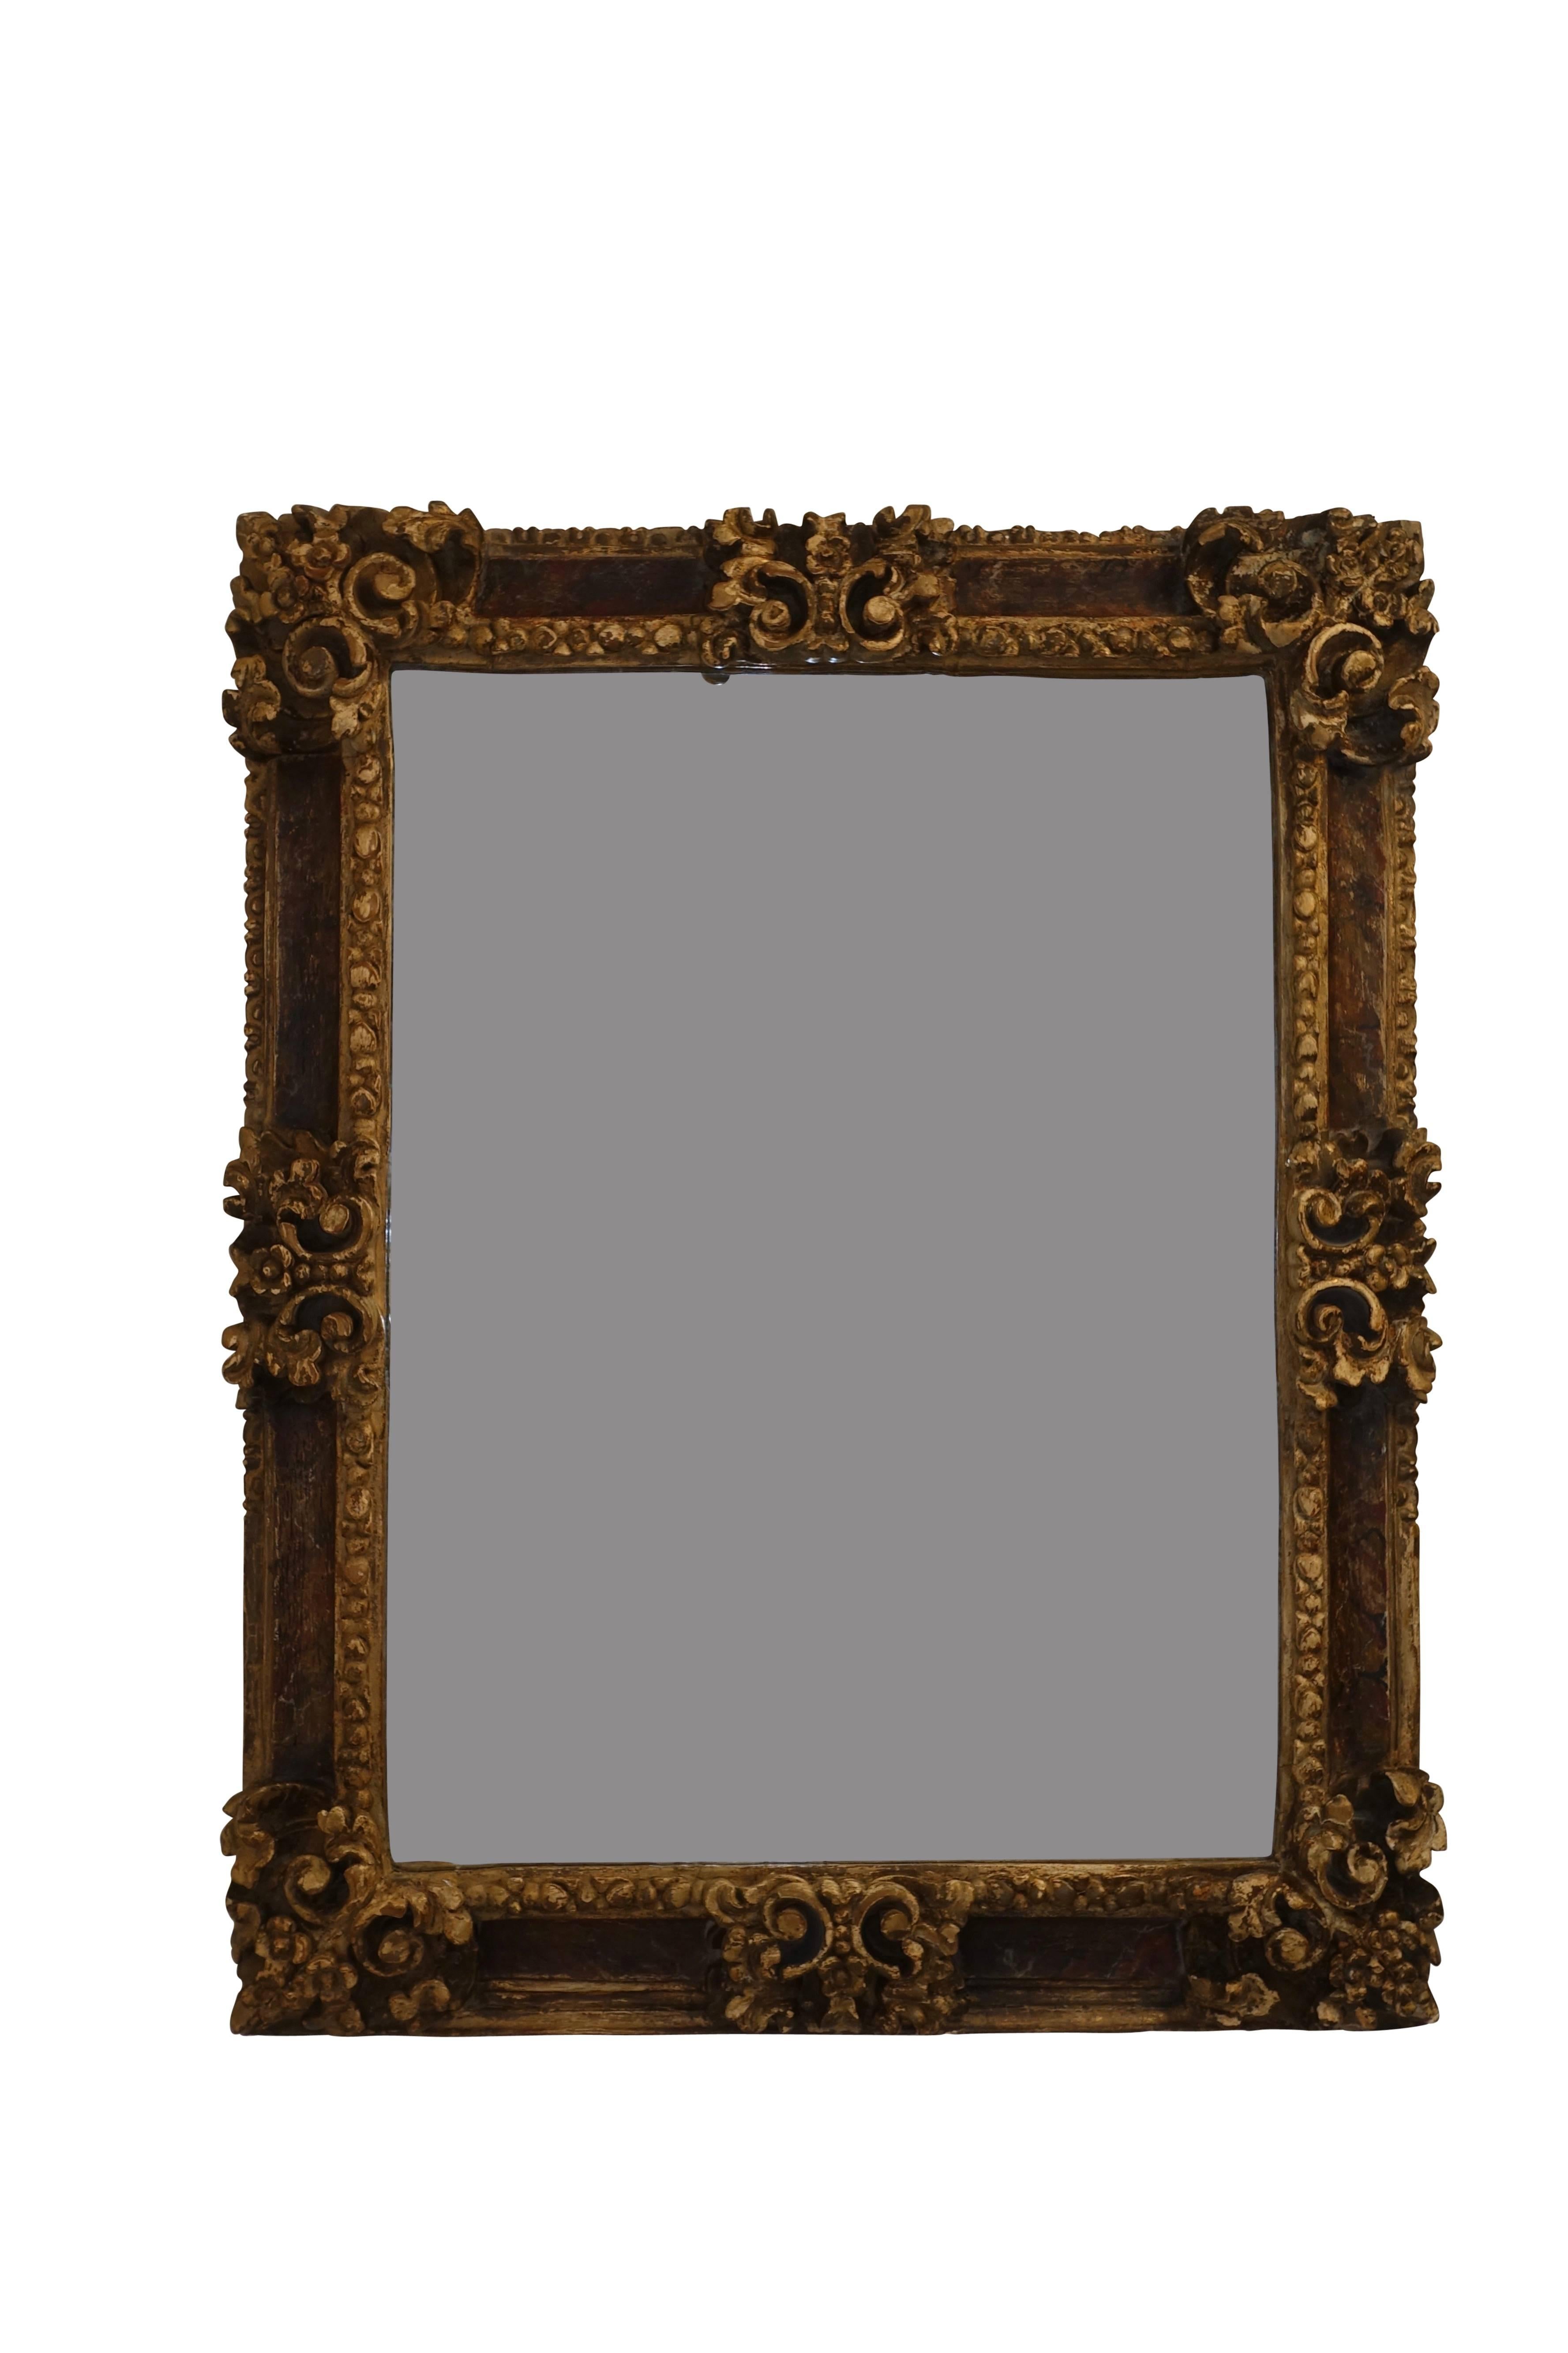 Spanish Colonial Gilt and Painted Mirror Frame, 19th Century 2